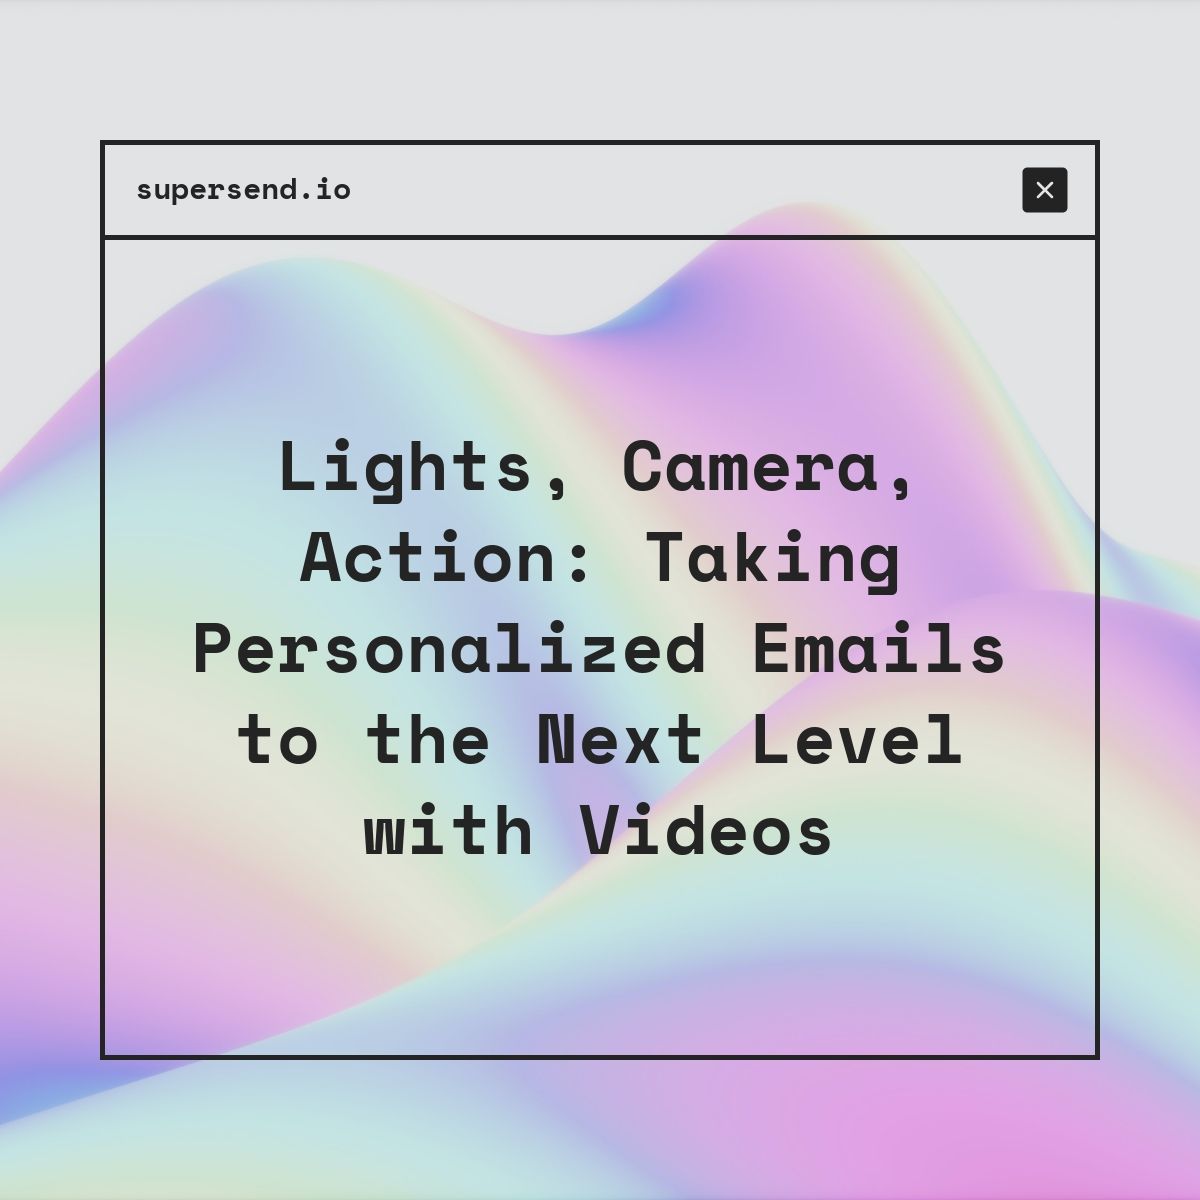 Lights, Camera, Action: Taking Personalized Emails to the Next Level with Videos